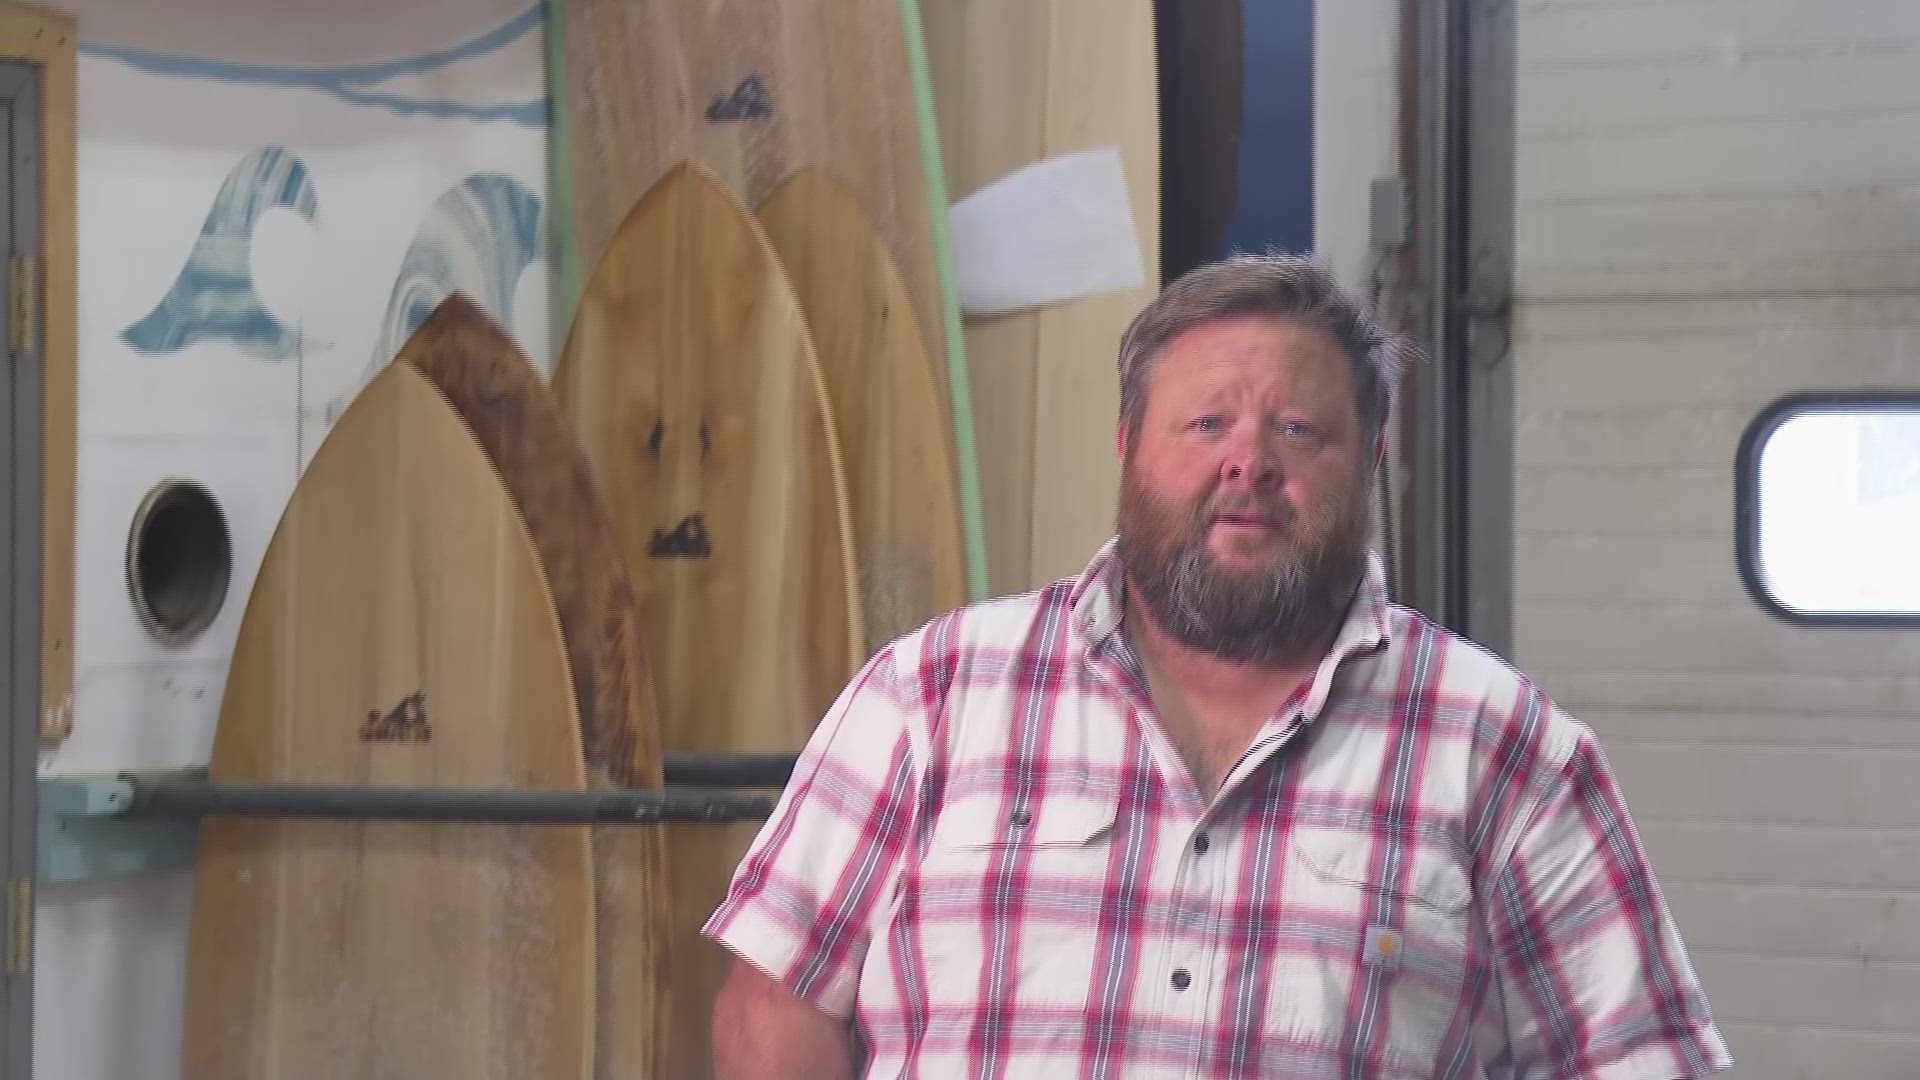 Grain Surfboards in York makes surfboards using Maine cedar, and offers classes for people to learn how to make their own boards.